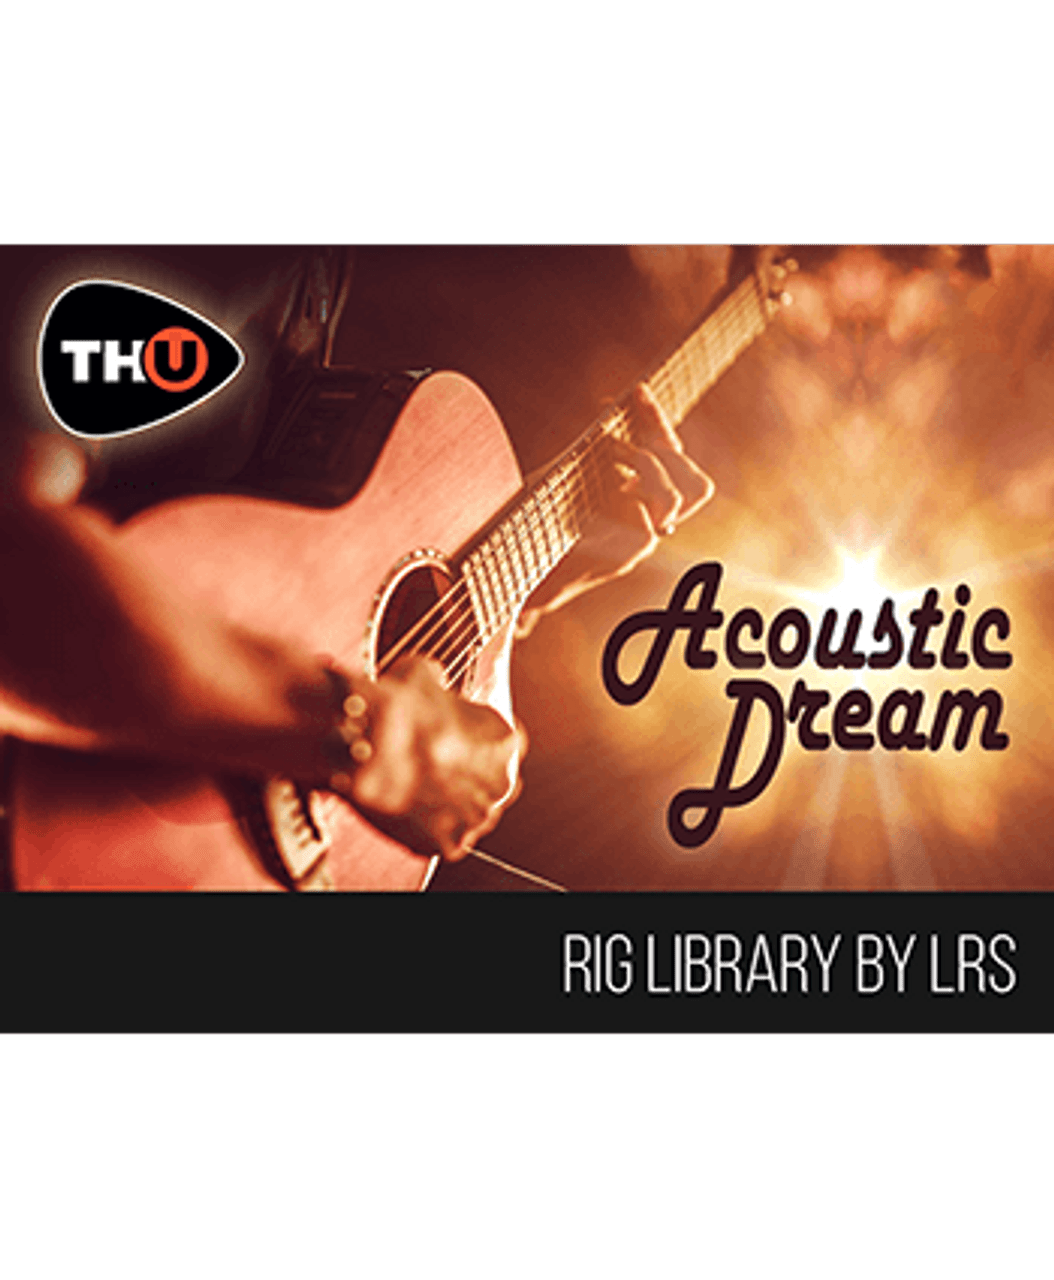 LRS Acoustic Dream Rig Library for TH-U